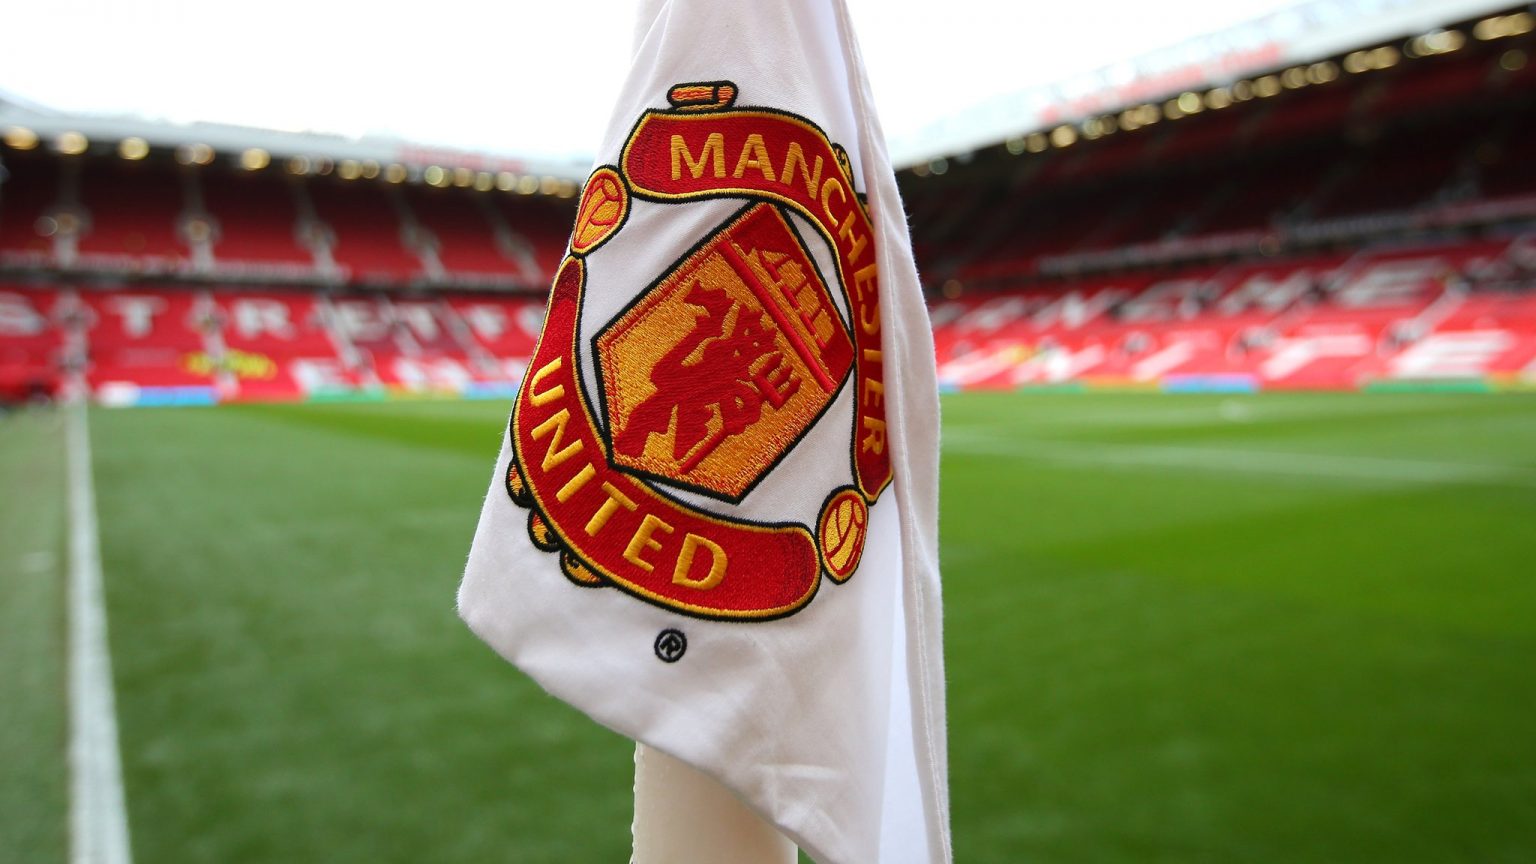 Man United owners await fresh bids from buyers after deadline